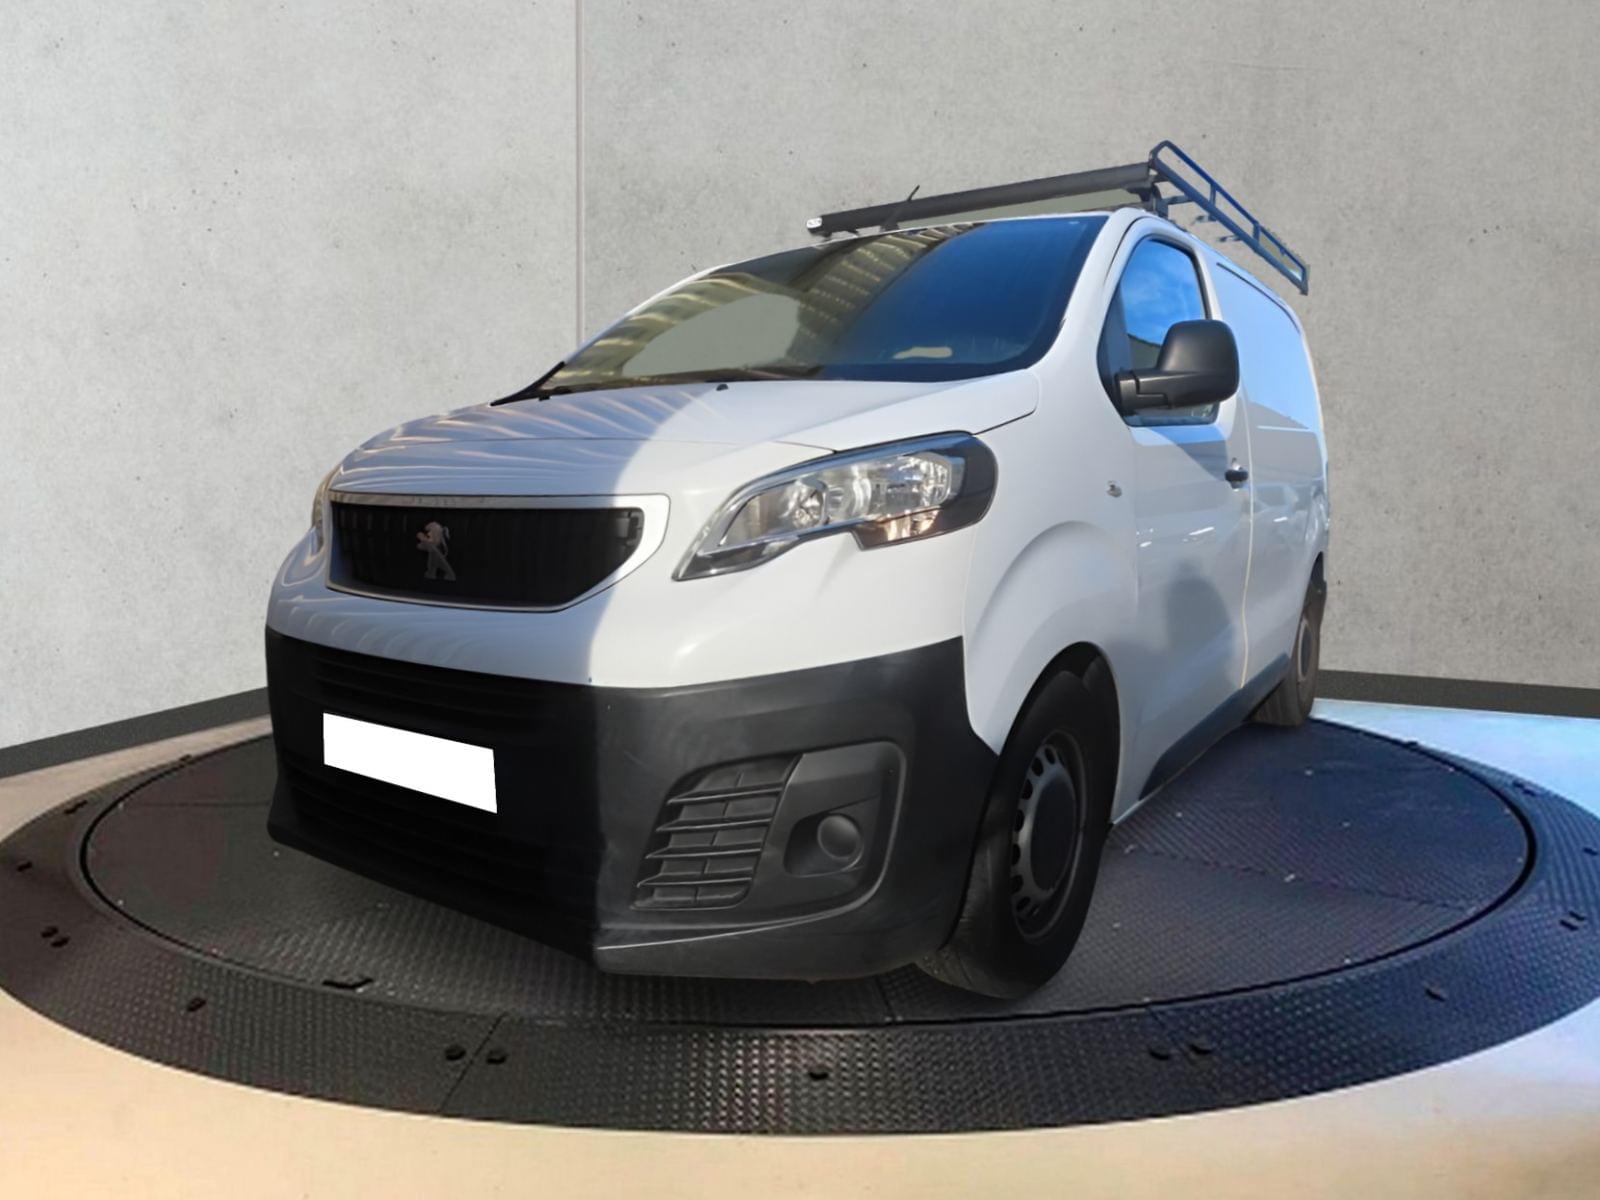 PEUGEOT EXPERT COMPACT 1.6 BLUE HDI S&S PRO 115 1 